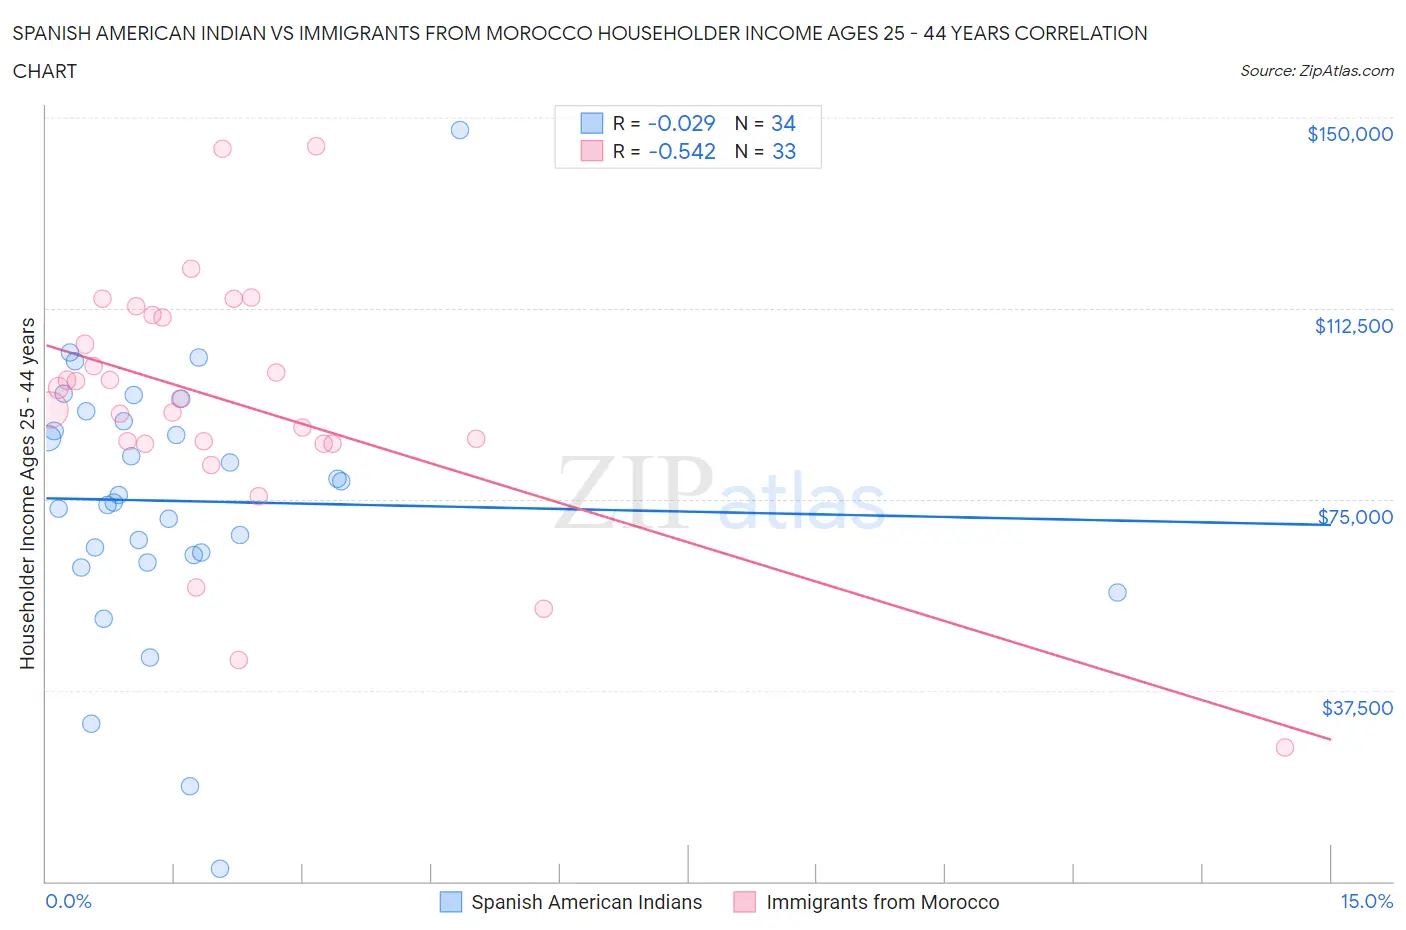 Spanish American Indian vs Immigrants from Morocco Householder Income Ages 25 - 44 years